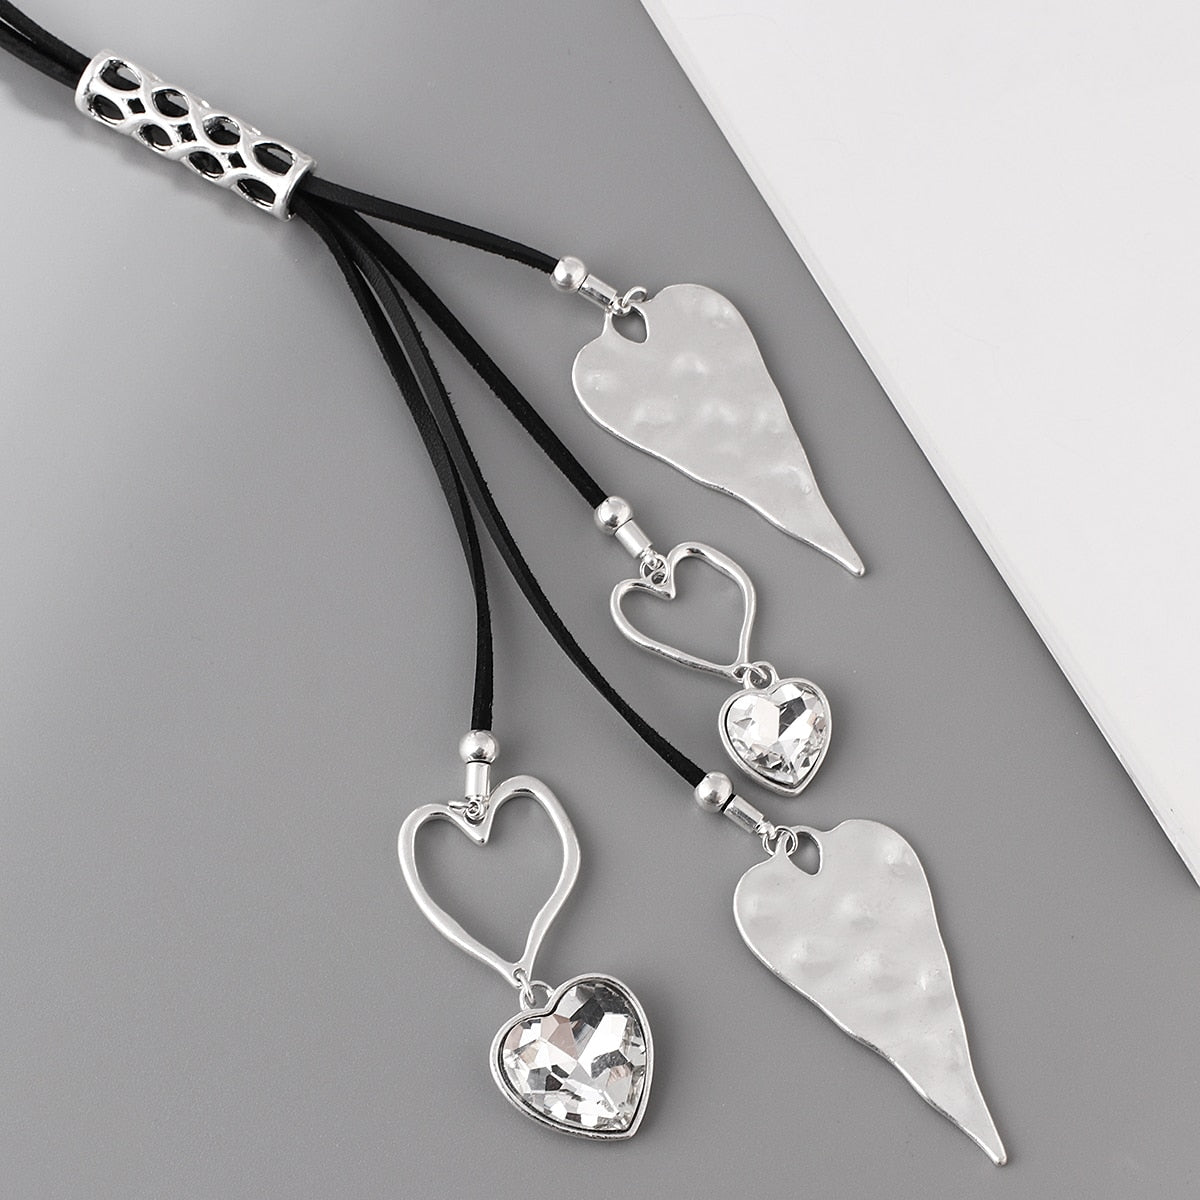 Crystal Heart Long Necklace